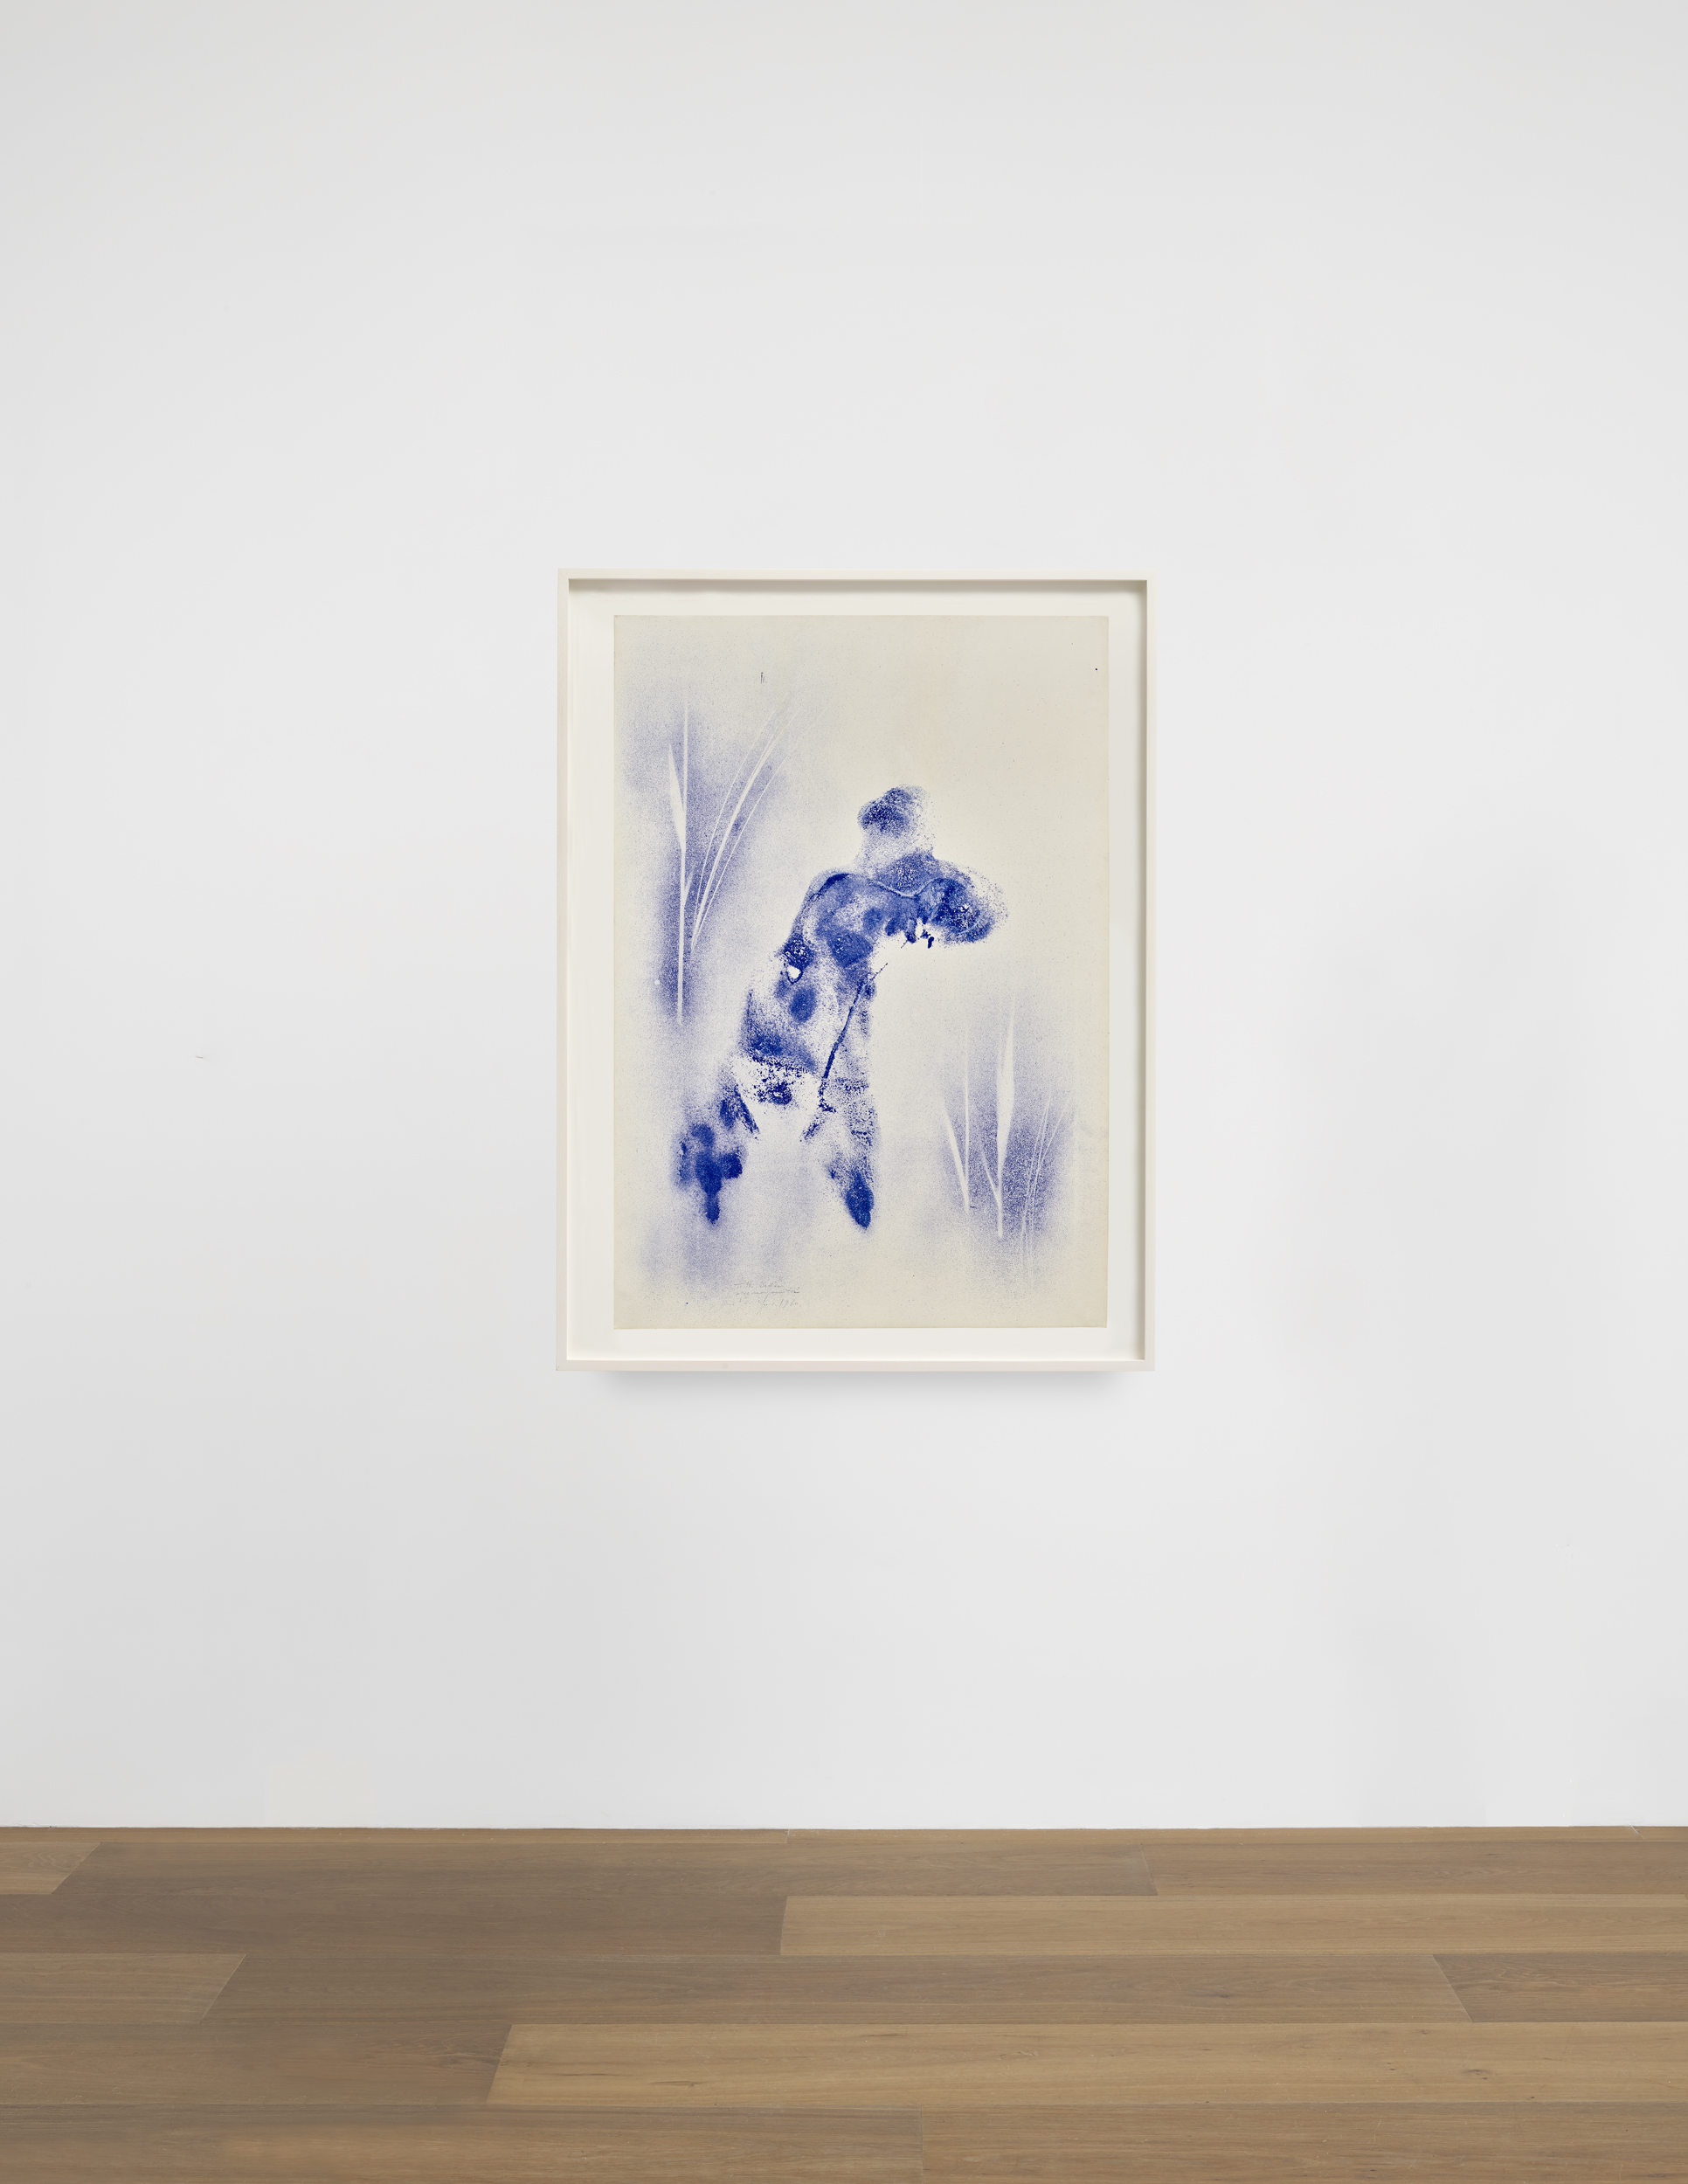 Installation view of Yves Klein's painting Anthropometrie sans titre (ANT 162)